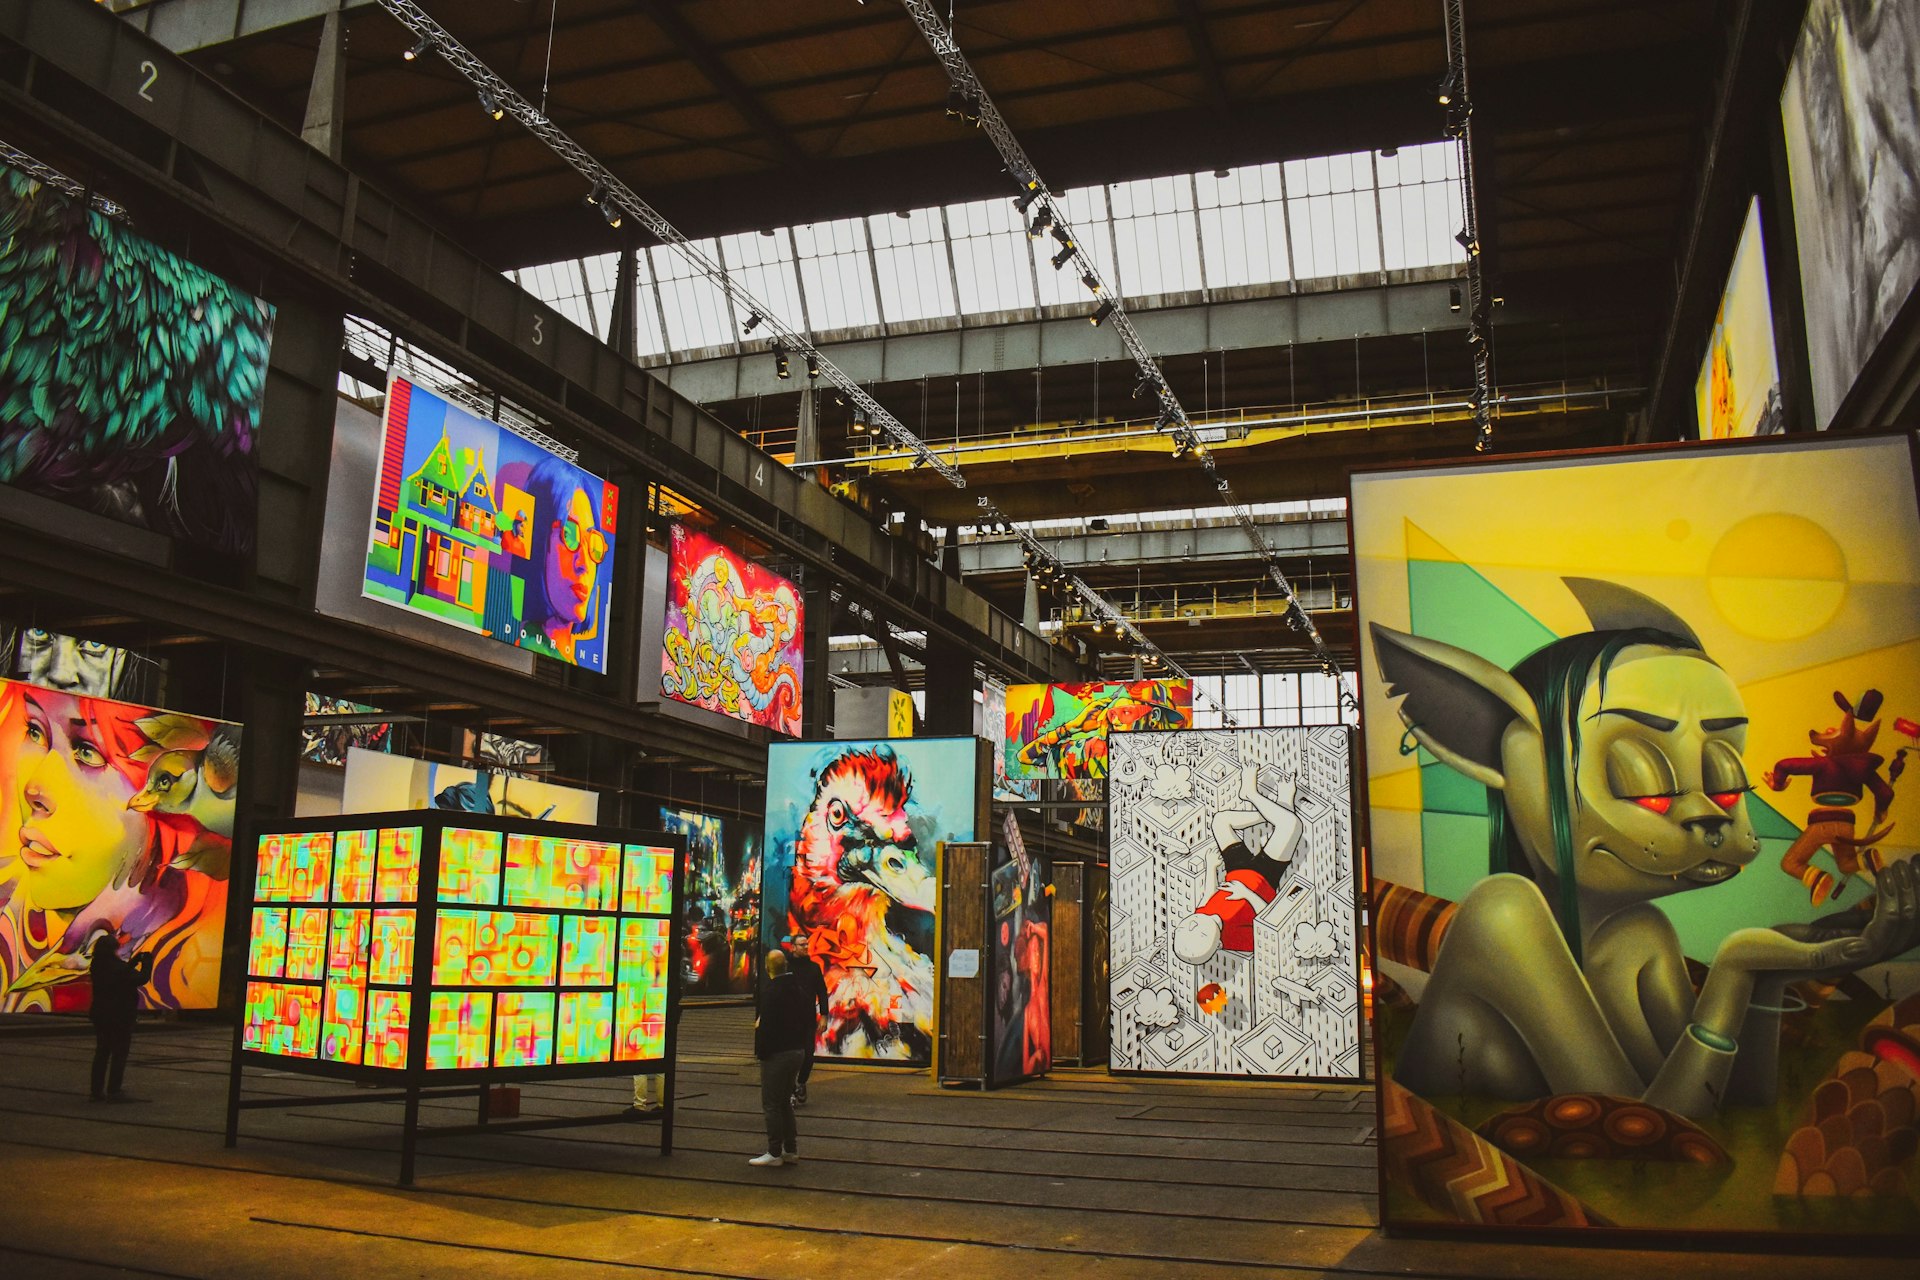 People gaze at vast displays of street art and graffiti in a warehouse-like gallery space